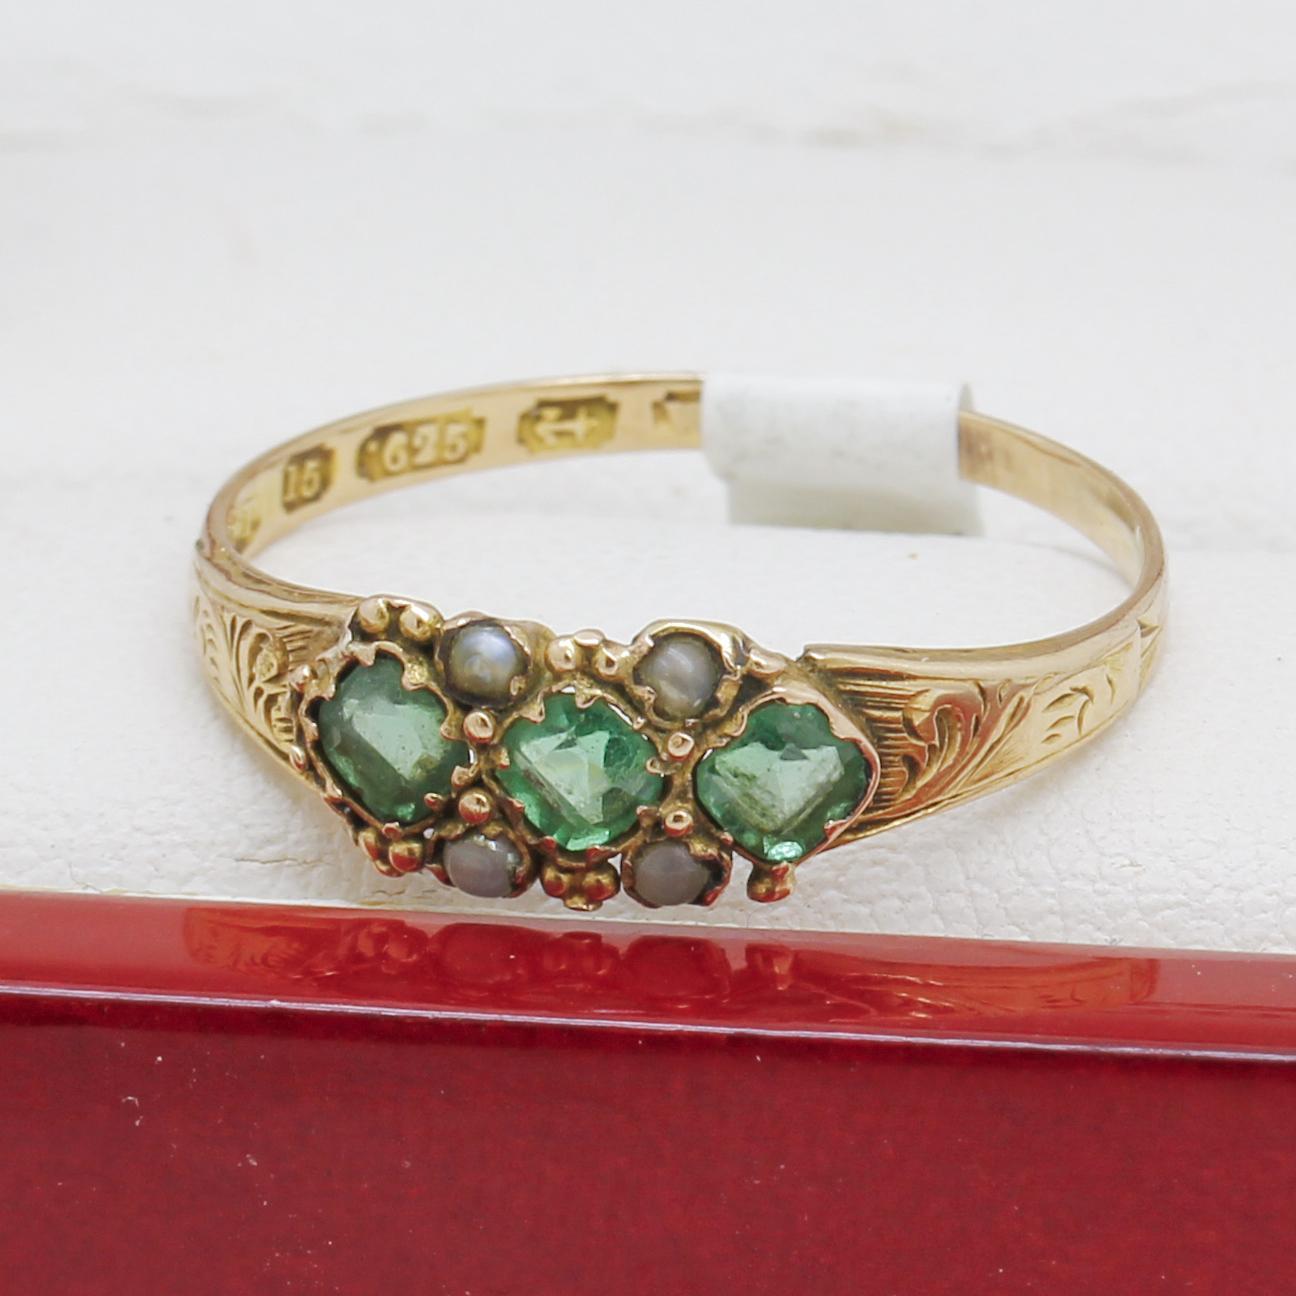 George V 15ct yellow gold Ring set with emerald and split pearls,
Marked Birmingham 1921 JP
Size Q - Can be resized